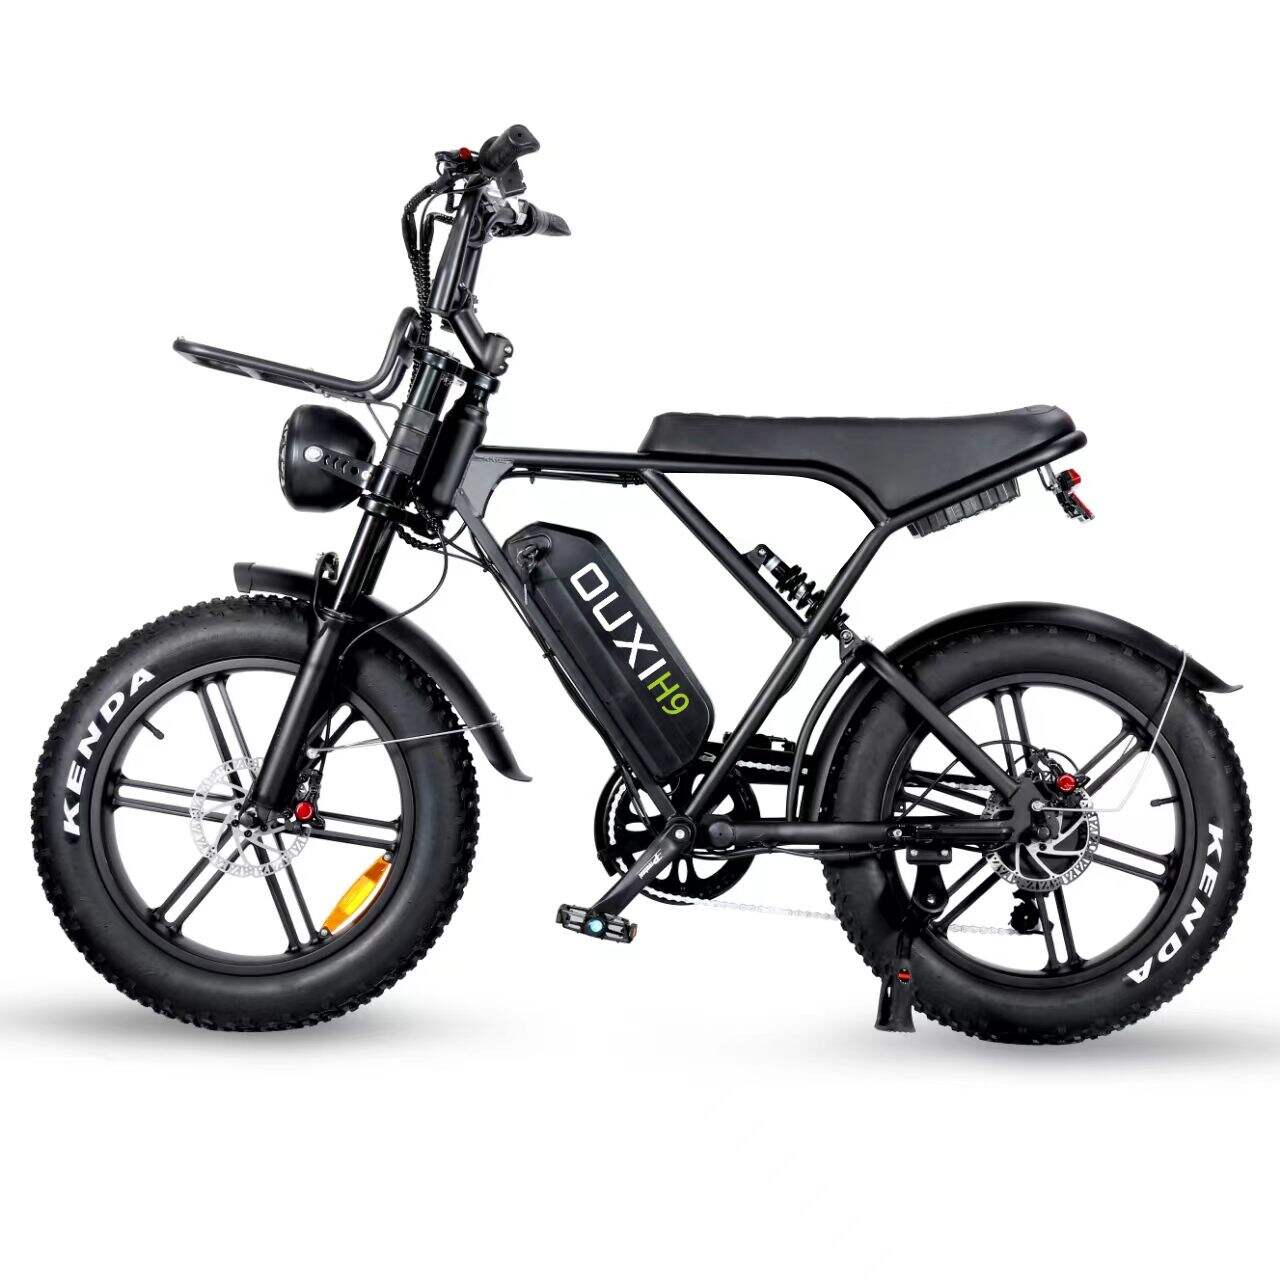 Powerful OUXI H9 Electric Bicycle Off-Road Performance and Versatility